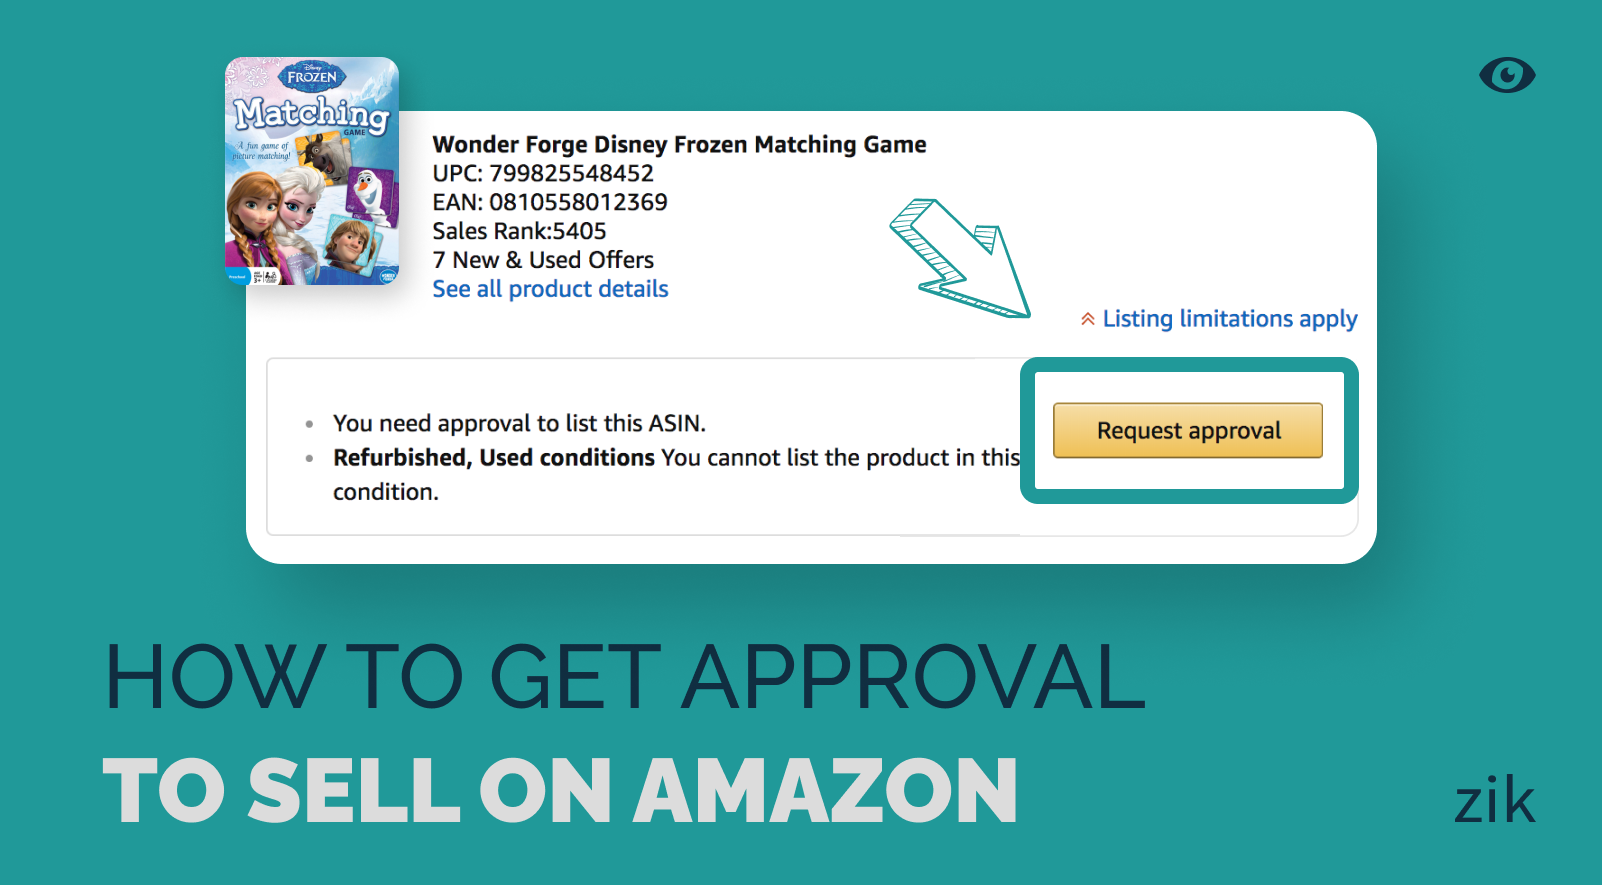 How to Get Approval to Sell on Amazon